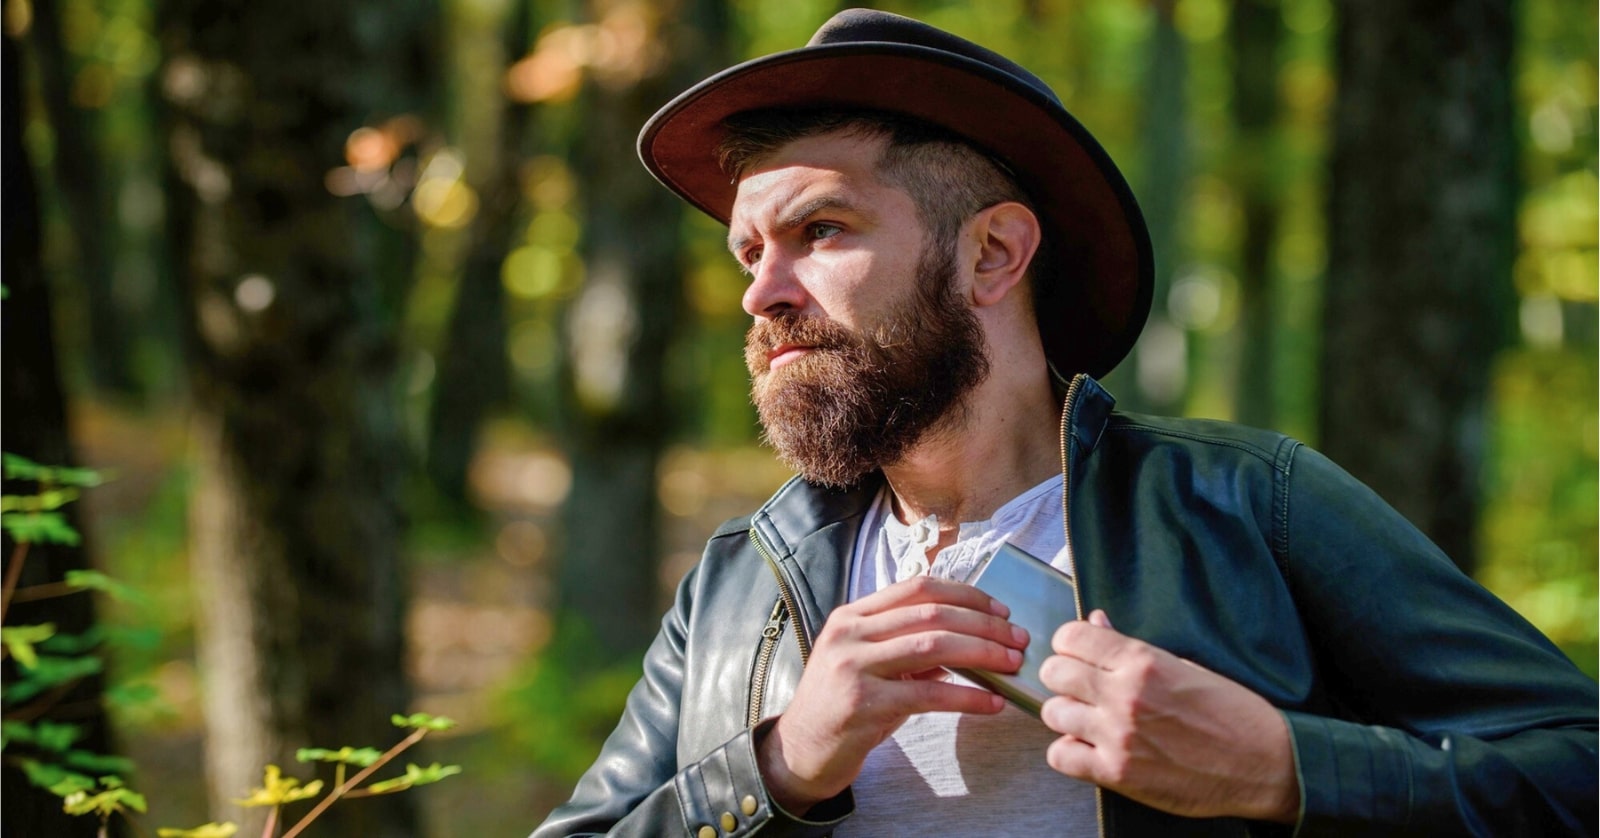 A bearded man wearing a wide-brimmed hat and a leather jacket stands in a forest while looking to his left. He is holding a folded map and appears to be preparing to unfold it. Sunlight filters through the trees, casting dappled light on the scene.